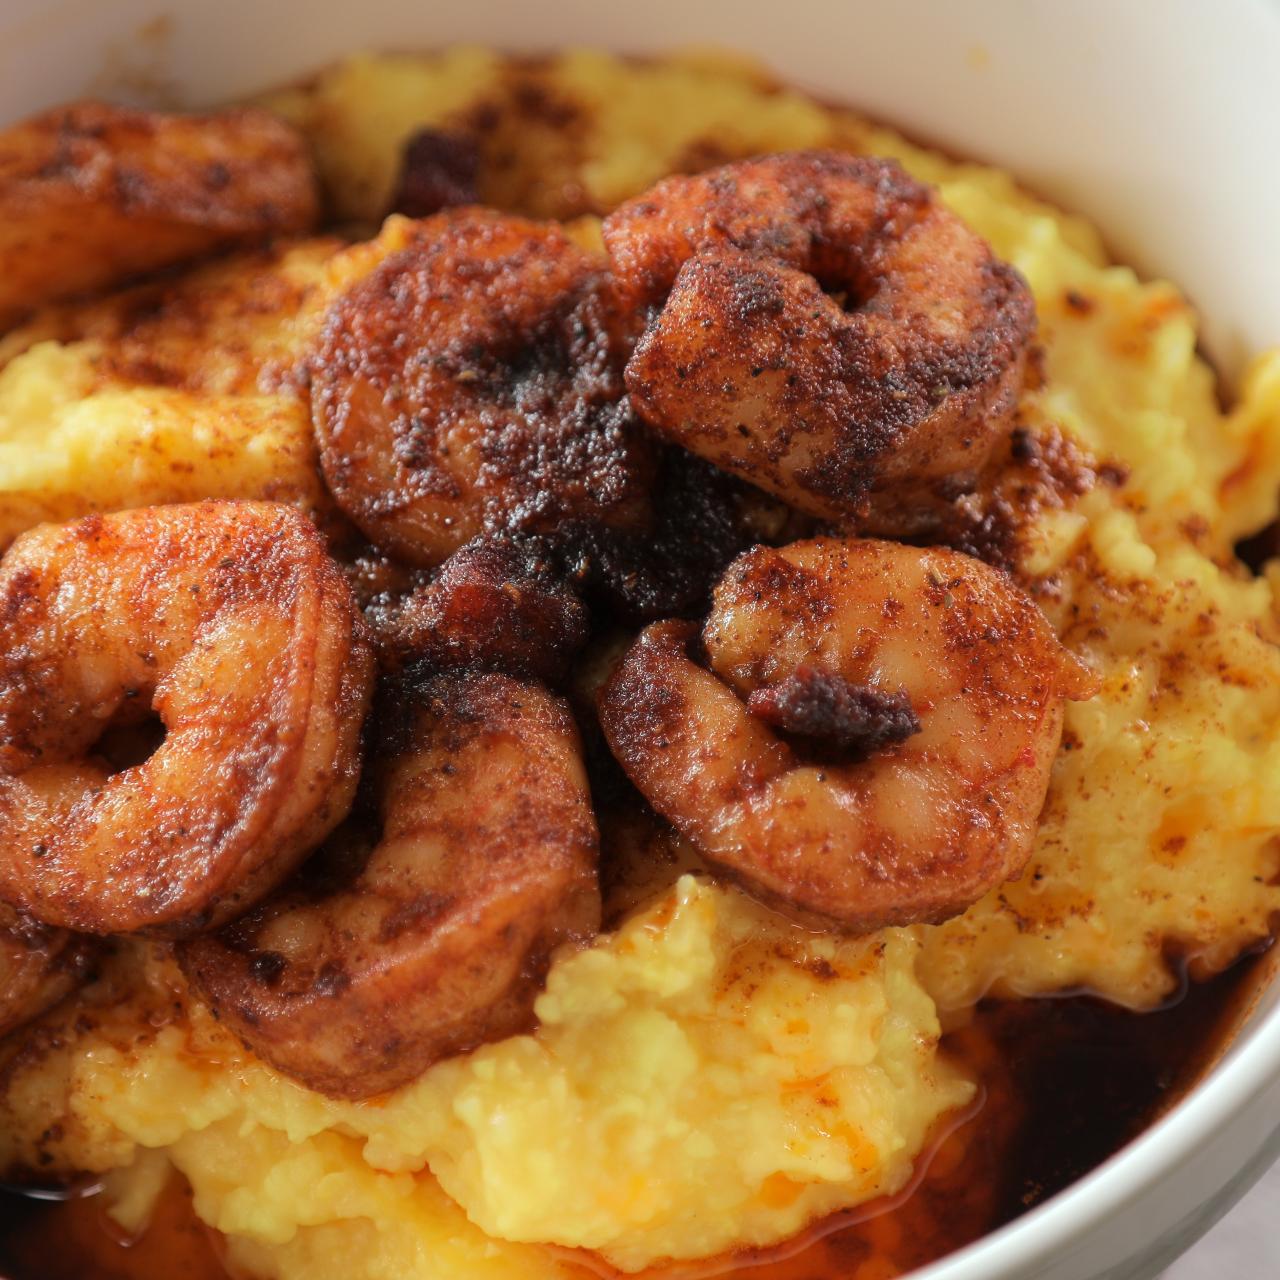 https://food.fnr.sndimg.com/content/dam/images/food/fullset/2021/11/19/0/DV3417-shrimp-and-grits-with-blackened-spiced-butter_s4x3.jpg.rend.hgtvcom.1280.1280.suffix/1637343510614.jpeg